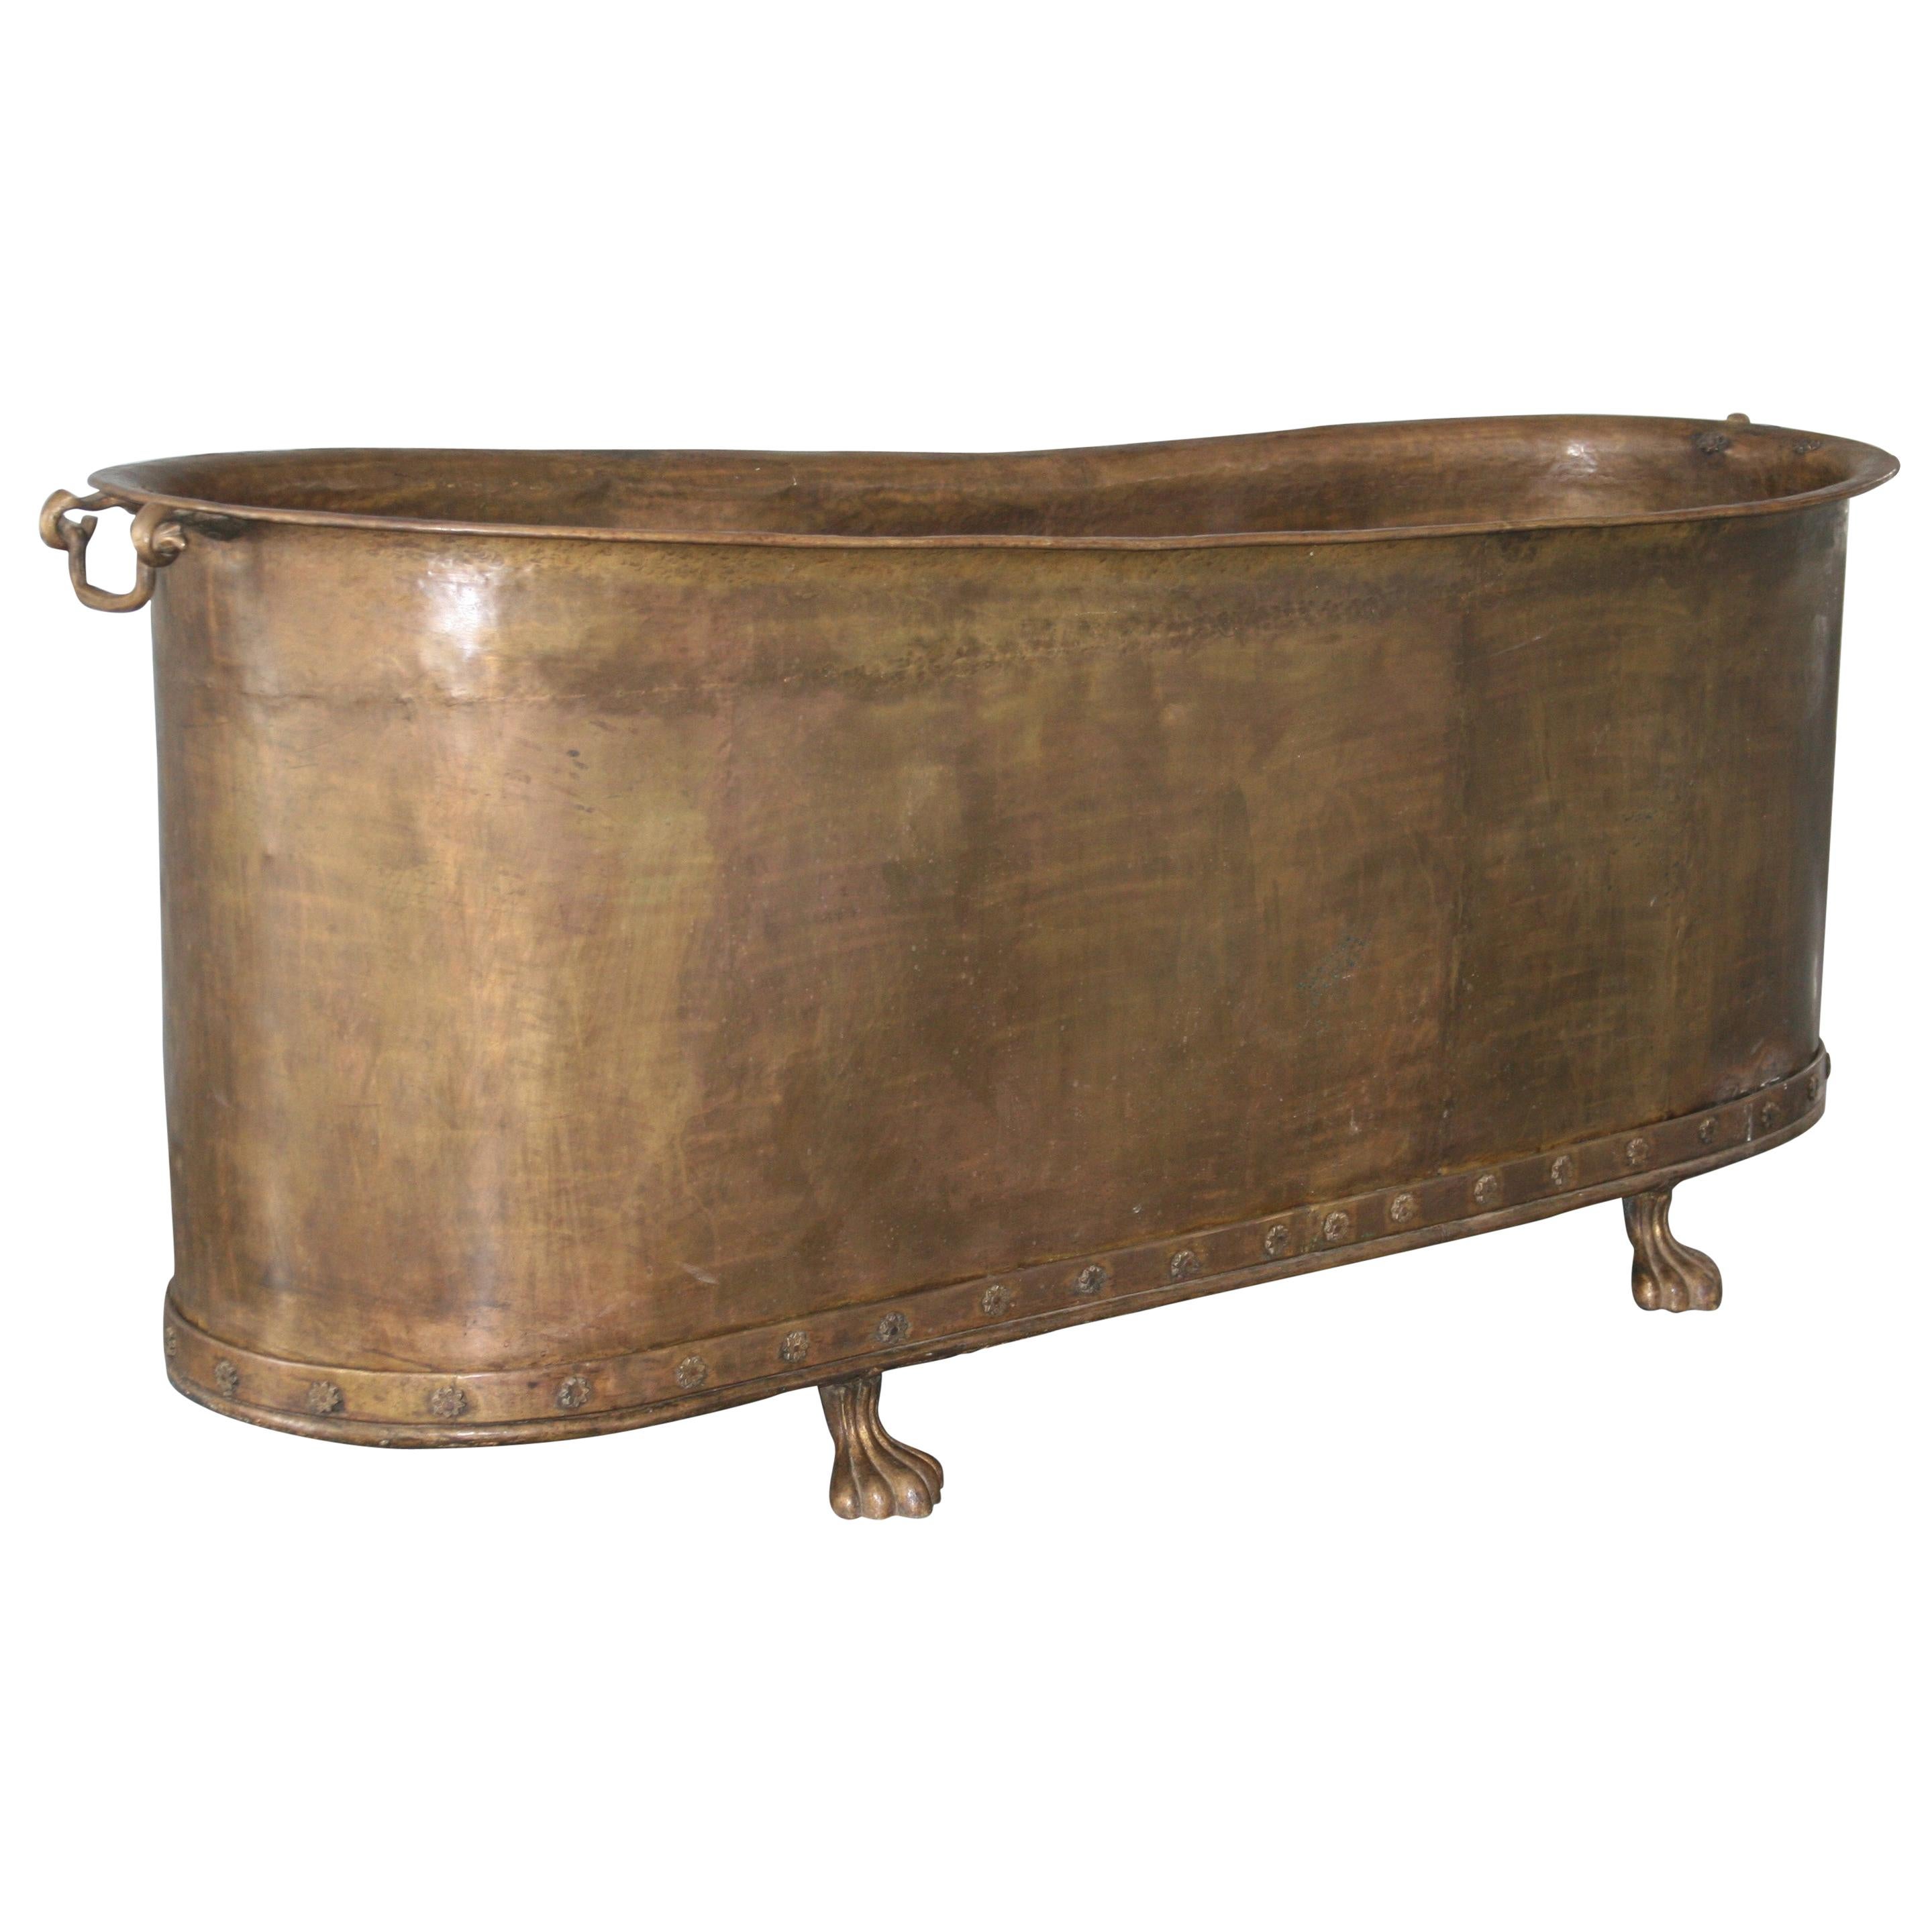 Vintage Hand Hammered Copper Alloy Freestanding Bath Tub Featuring Claw Feet    